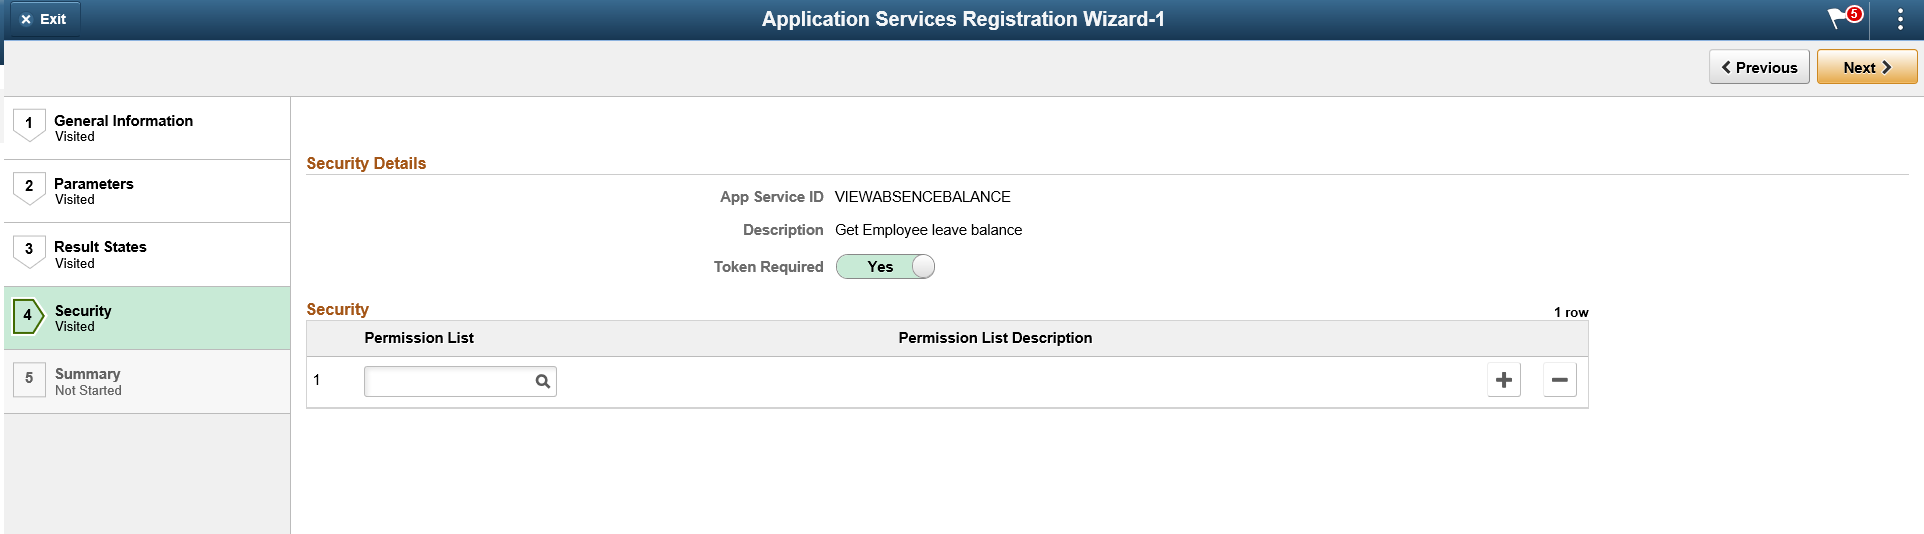 Application Service Registration Wizard - Security page